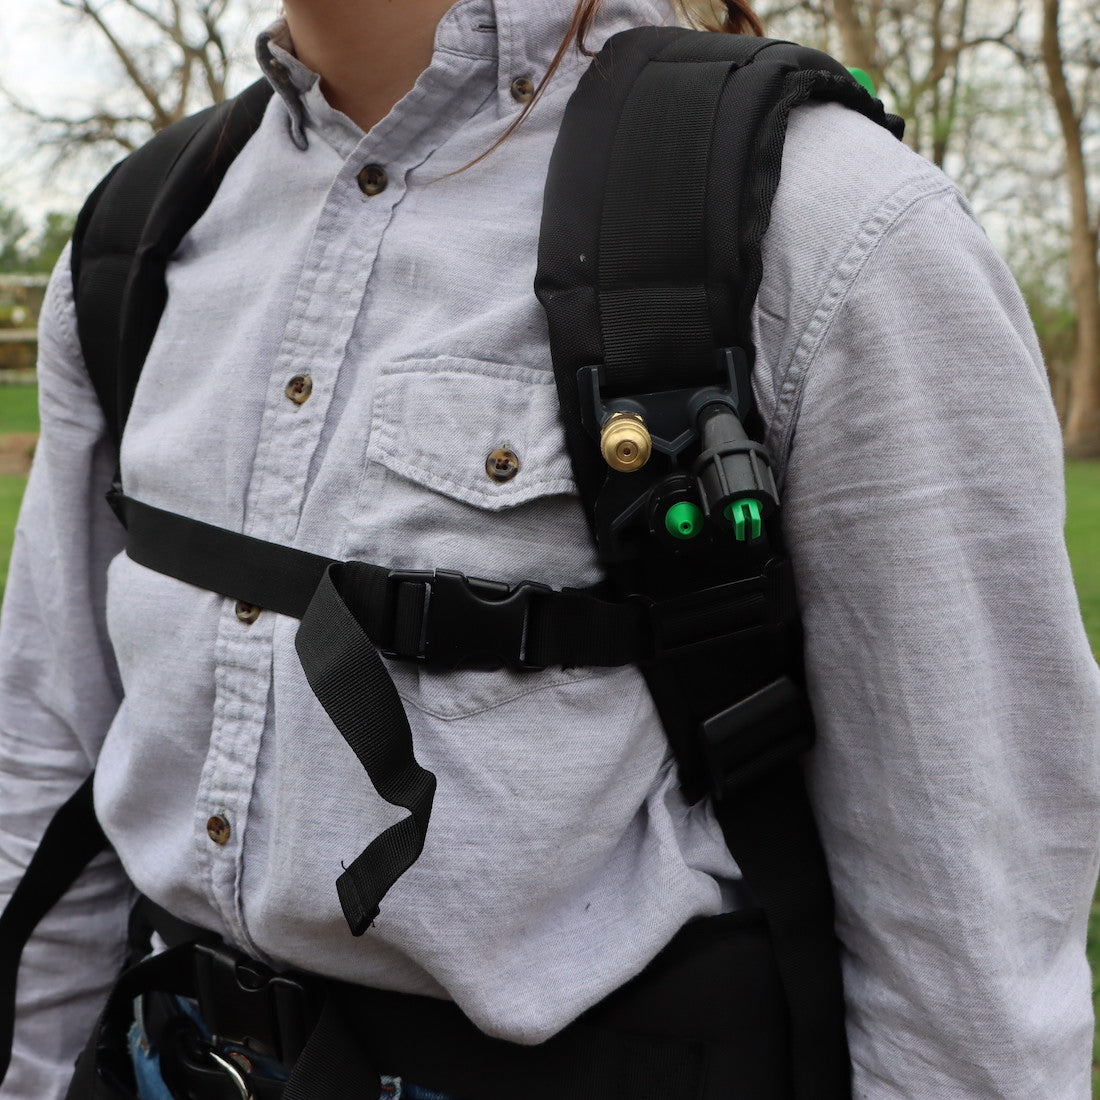 woman with backpack straps and nozzle holder